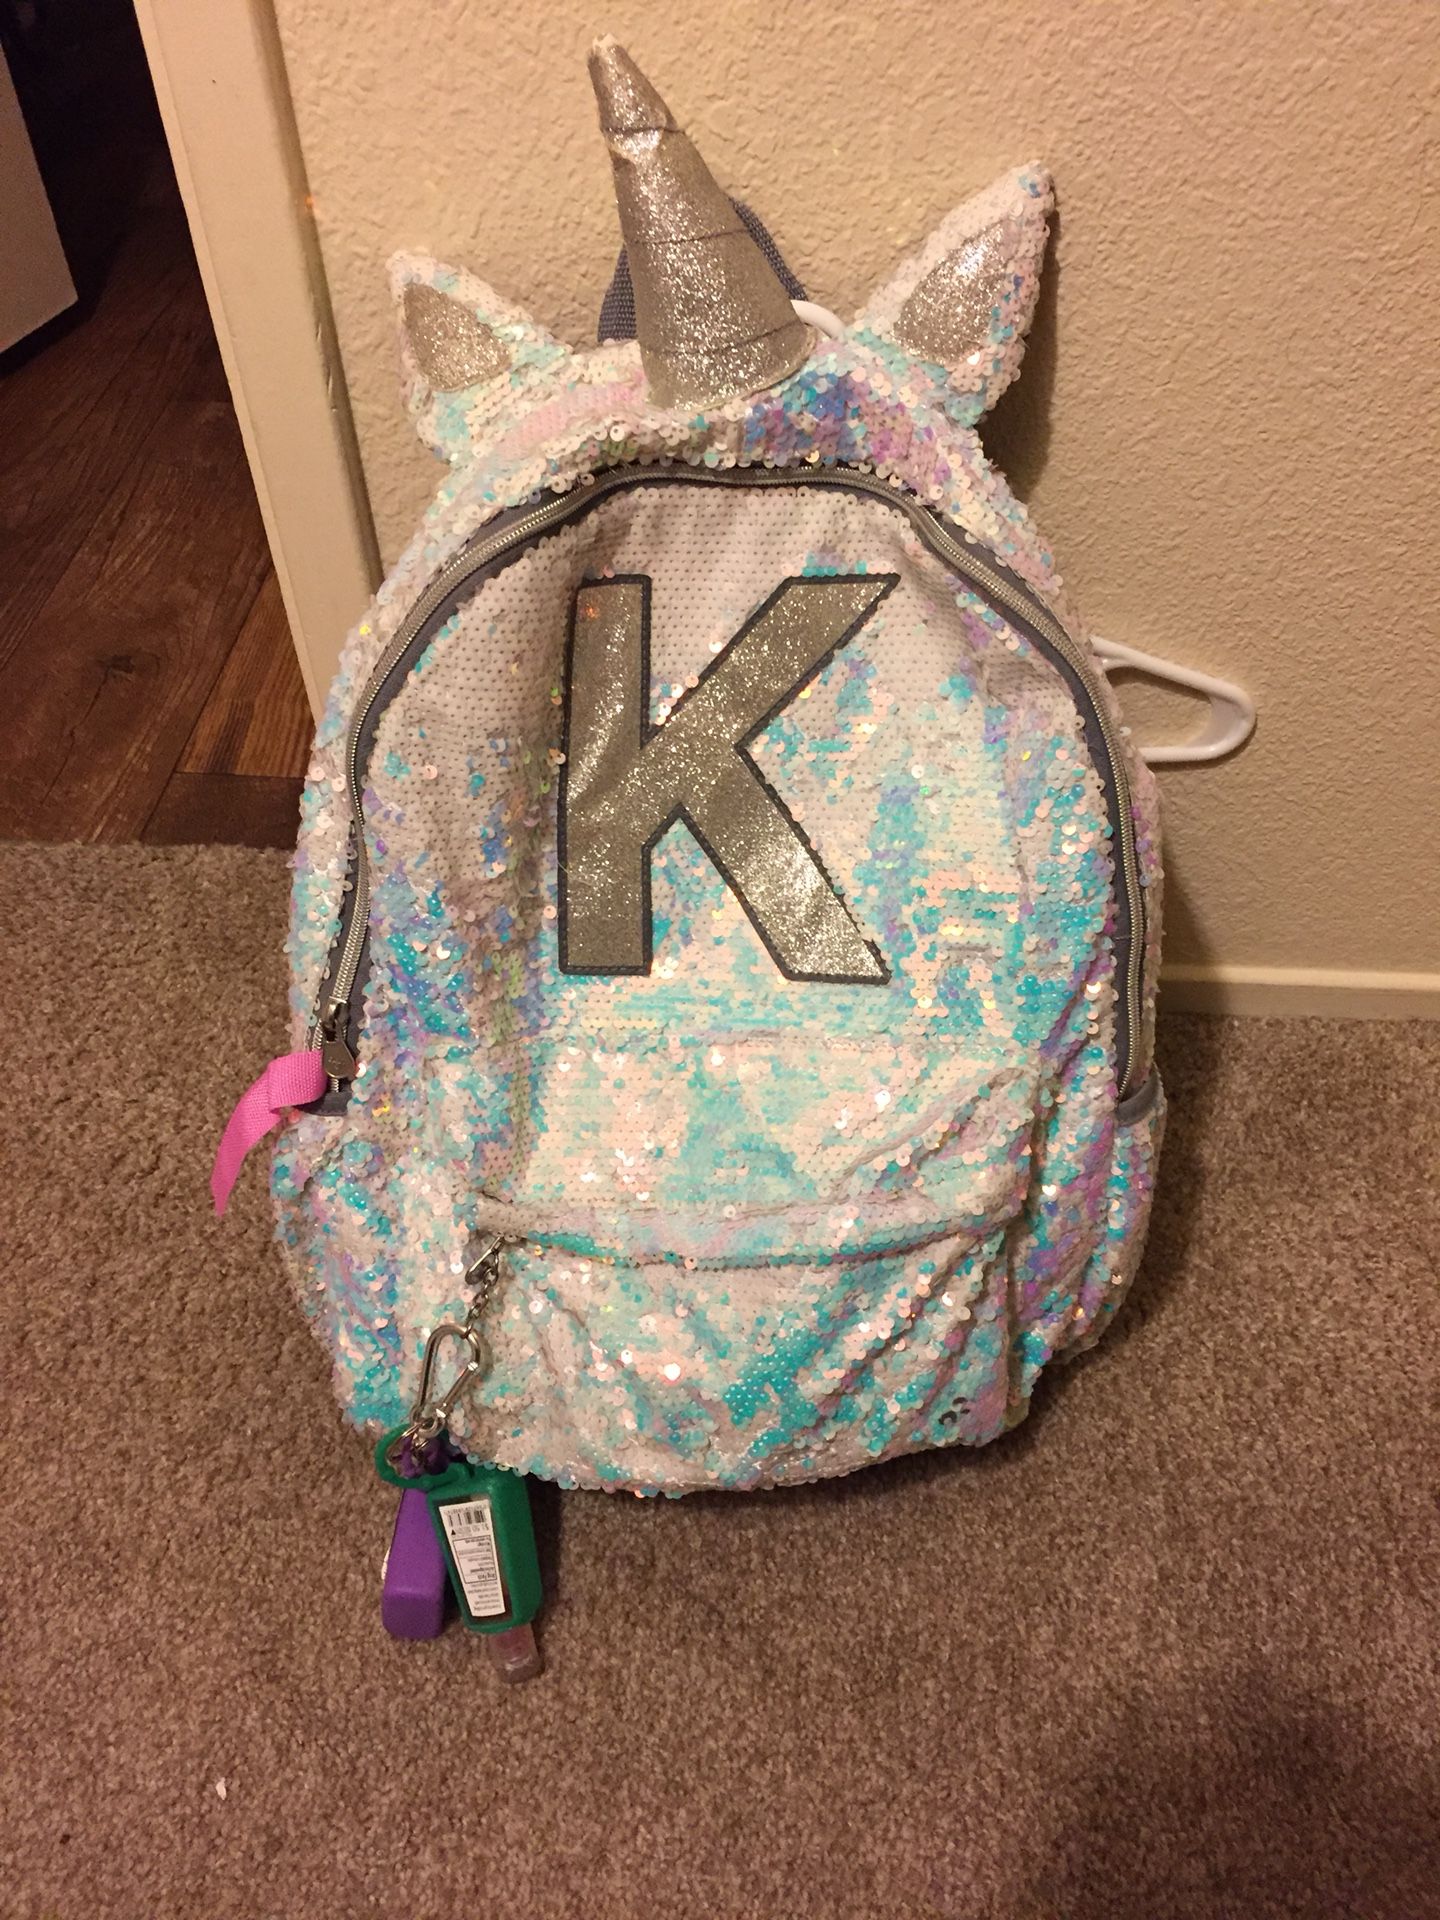 Toddler Backpack And Lunch Box for Sale in Modesto, CA - OfferUp